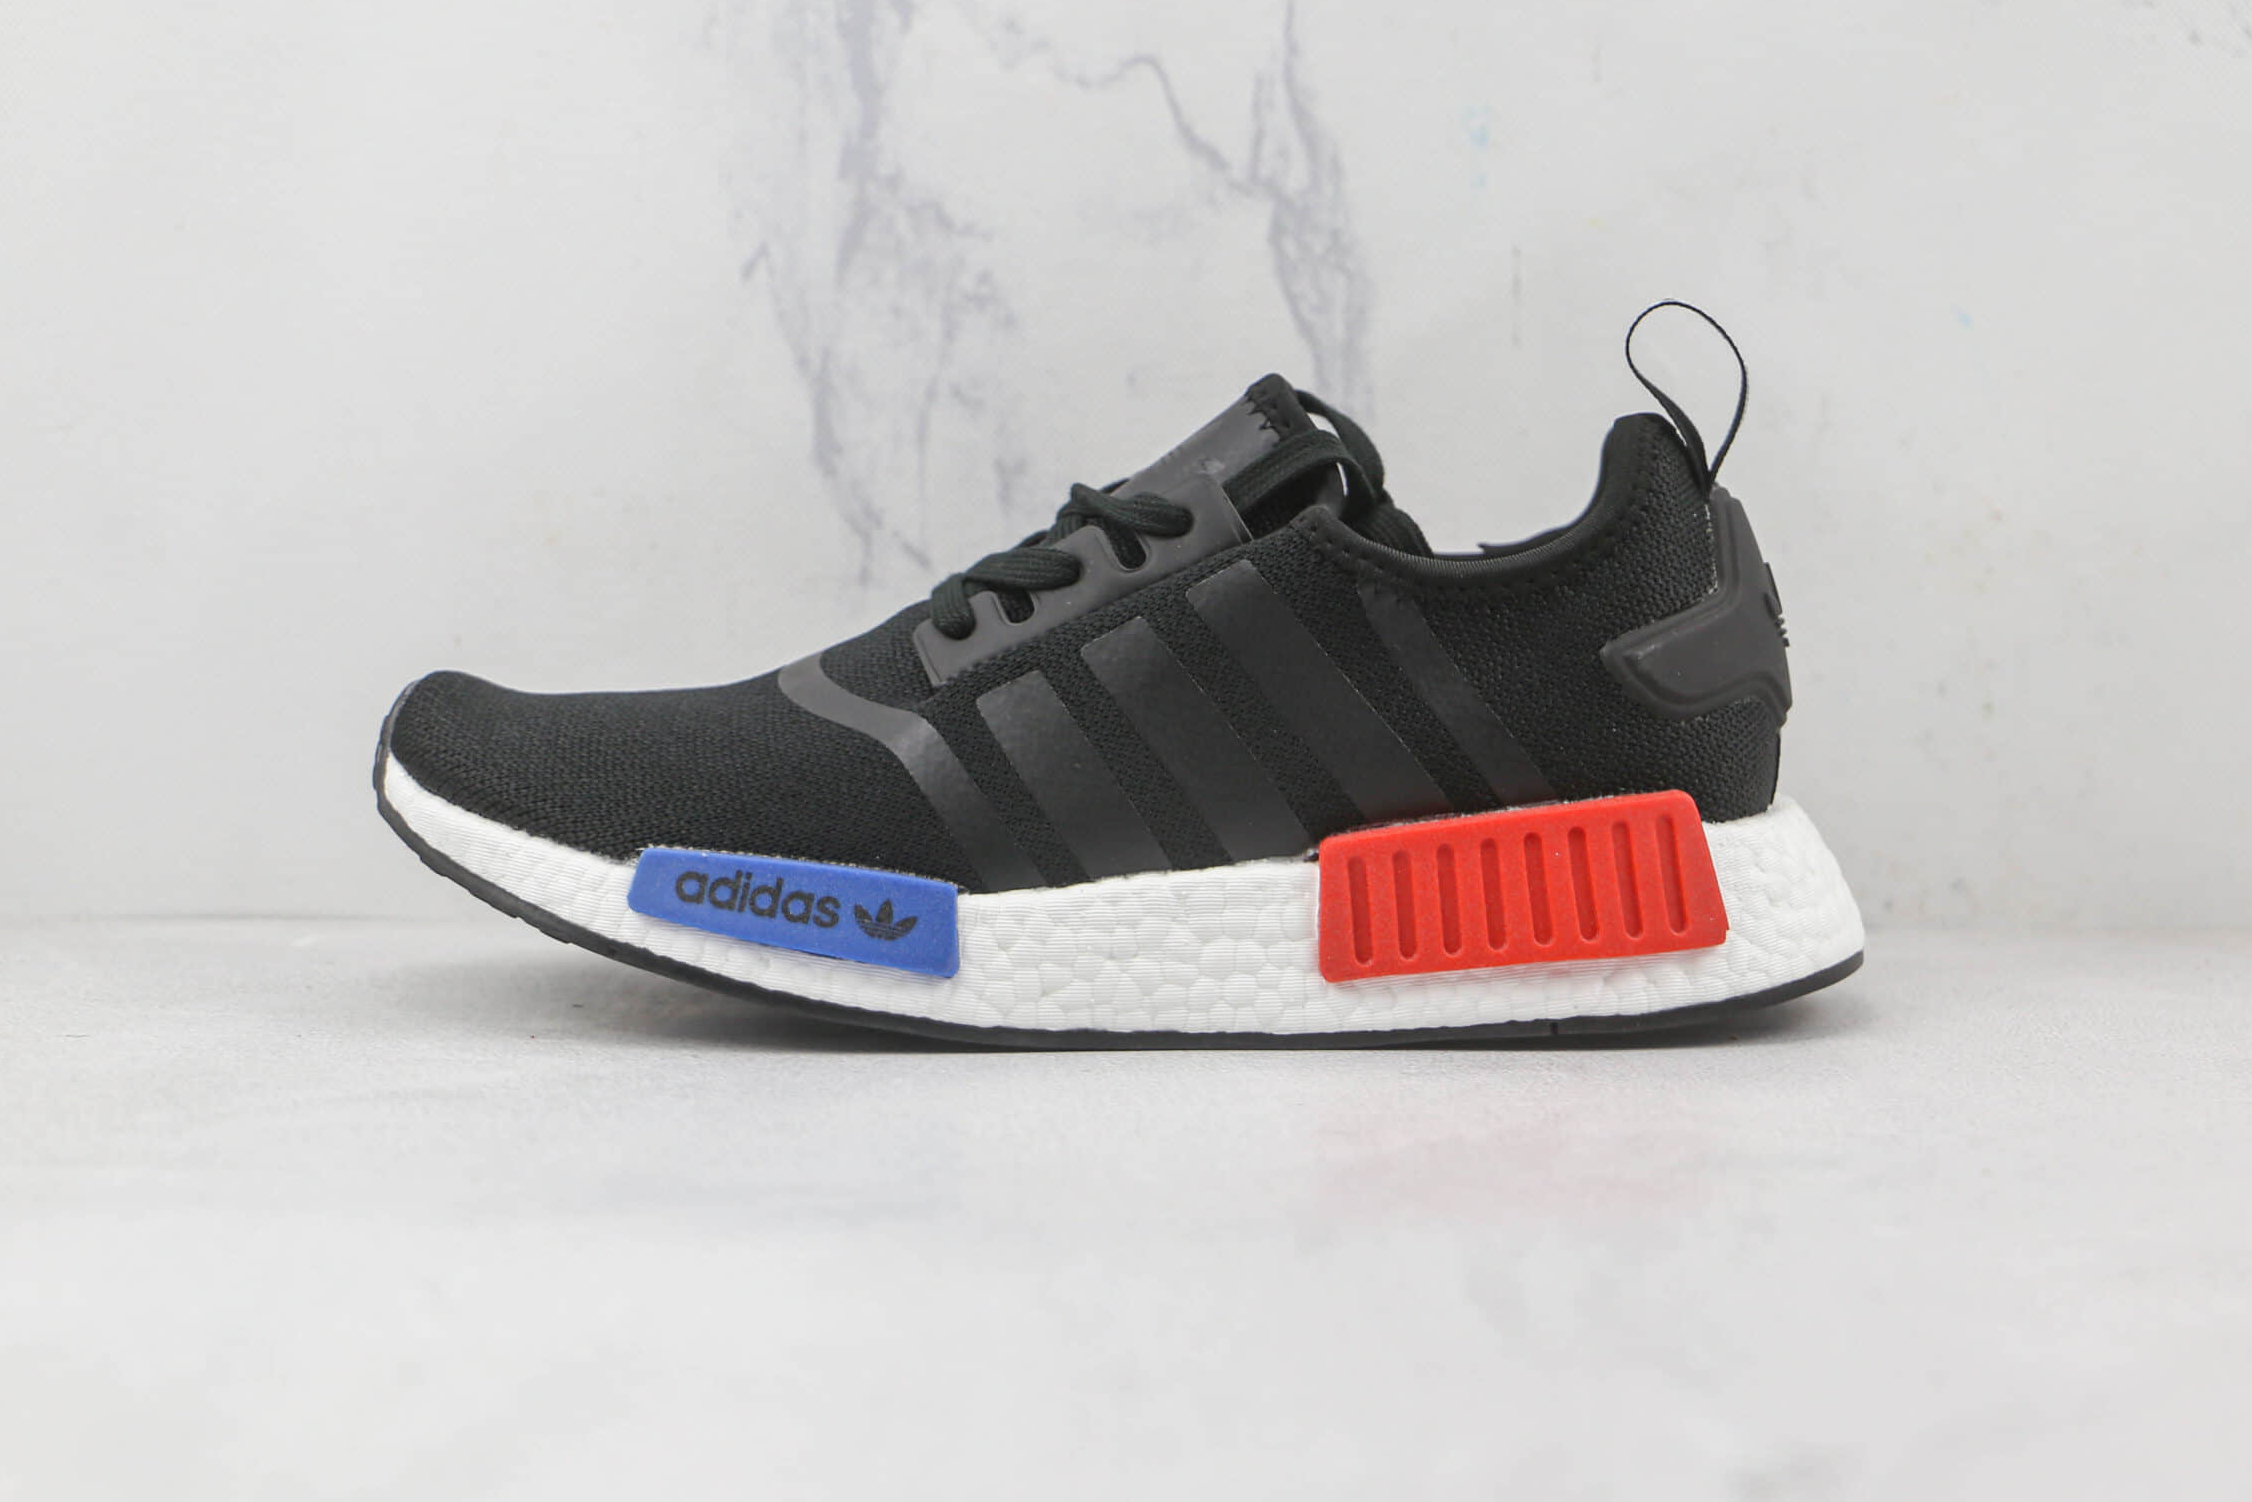 Adidas NMD_R1 'Black OG' GZ7922 - Premium Sneakers for Urban Style | Limited Stock.